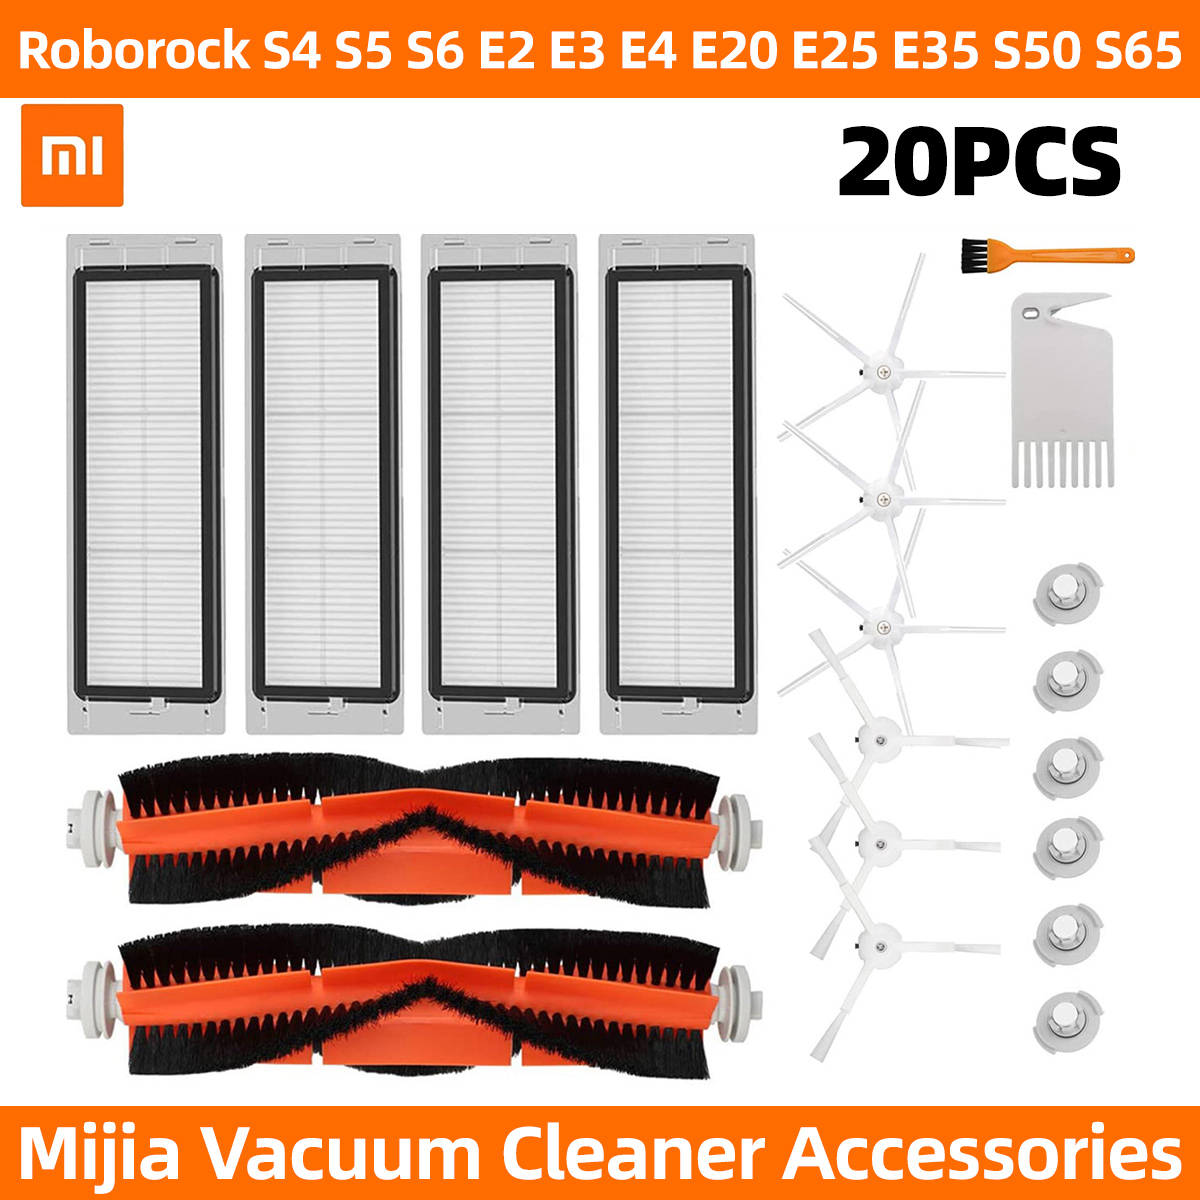 Find 20pcs Replacements for Roborock S4 S5 S6 E4 E20 E25 E35 S50 S65 Xiaomi Mi Mijia Robotic Vacuum Cleaner Parts Accessories Roller Brush*2 Side Brush*6 Filter*10 Cleaning Tool*2 [Not-original] for Sale on Gipsybee.com with cryptocurrencies